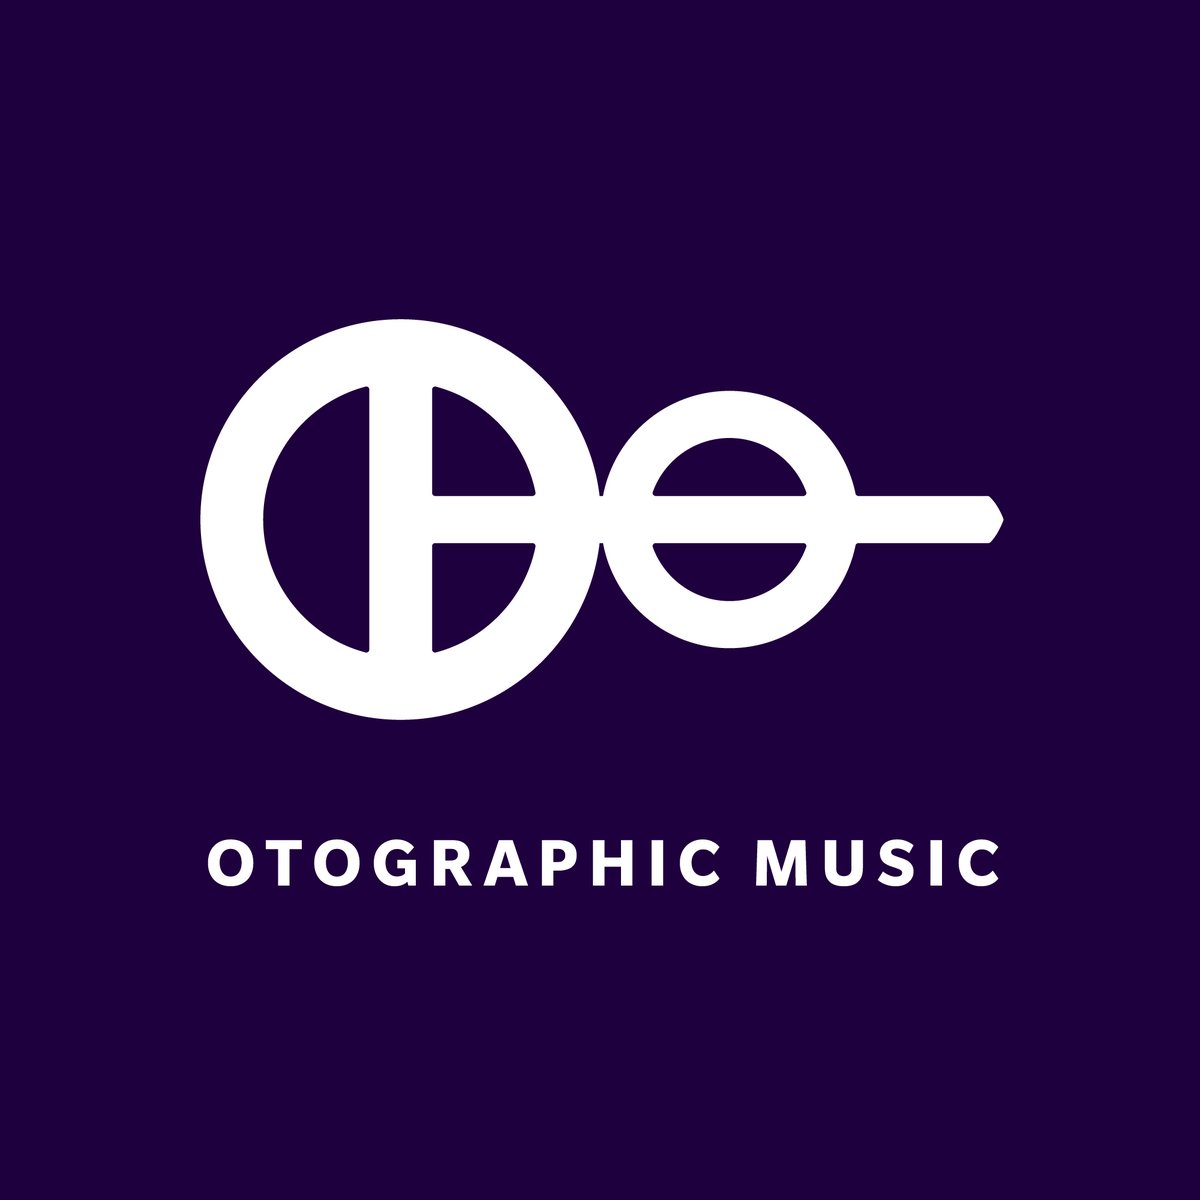 Otographic Musicのウェブサイトとロゴを一新しました。Our label logo and website have been redesigned.
otographicmusic.com